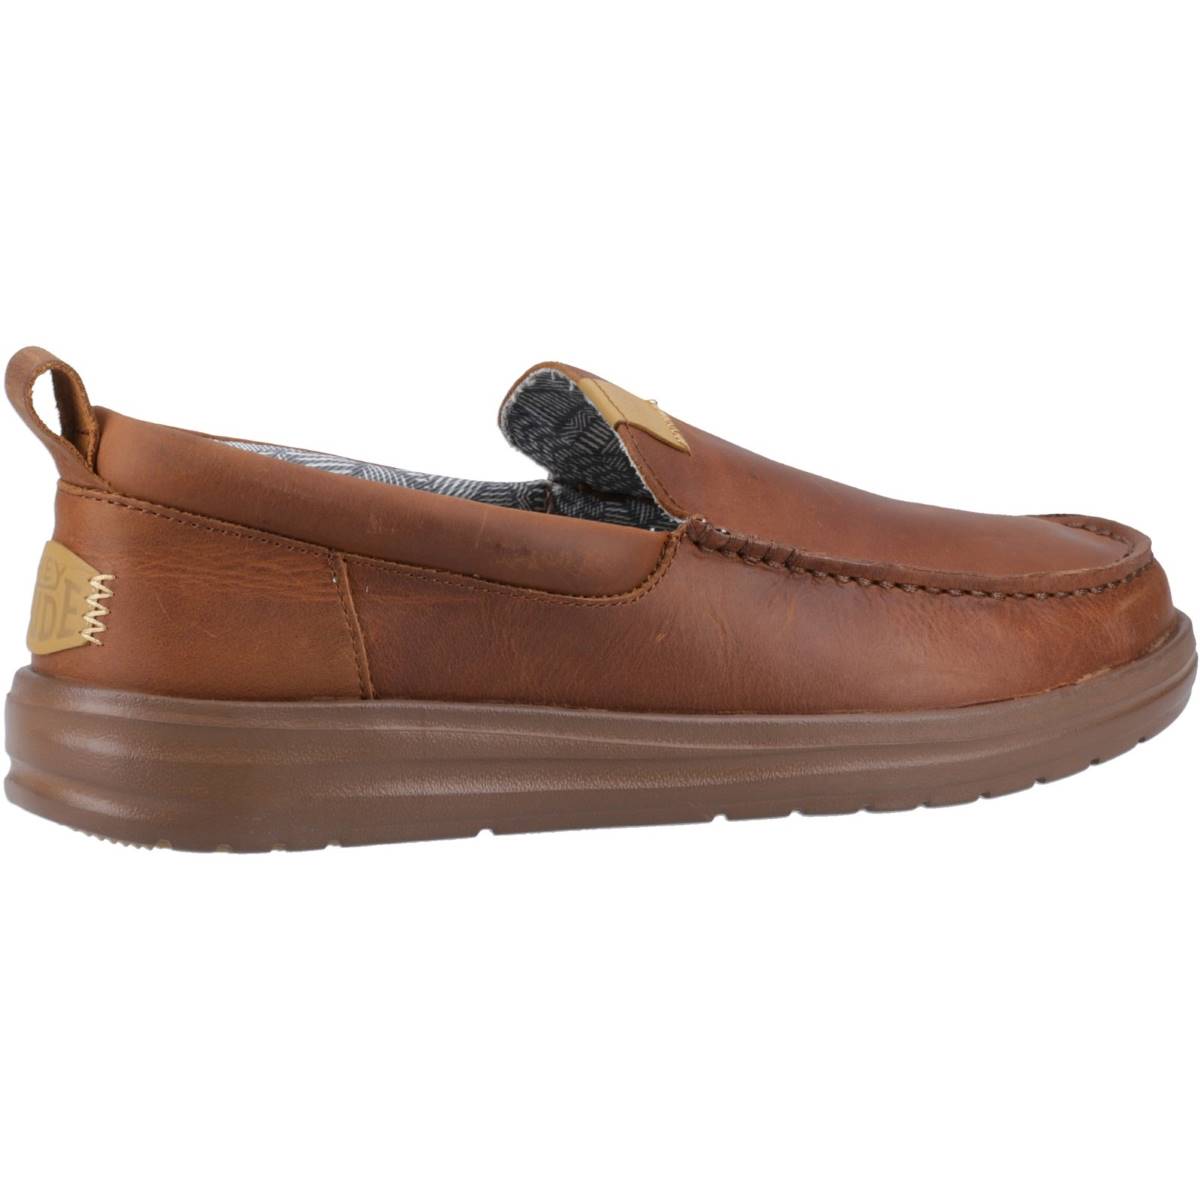 Hey Dude Wally Grip Moc Craft Leather Brown Mens Slip-on Shoes 40173-255